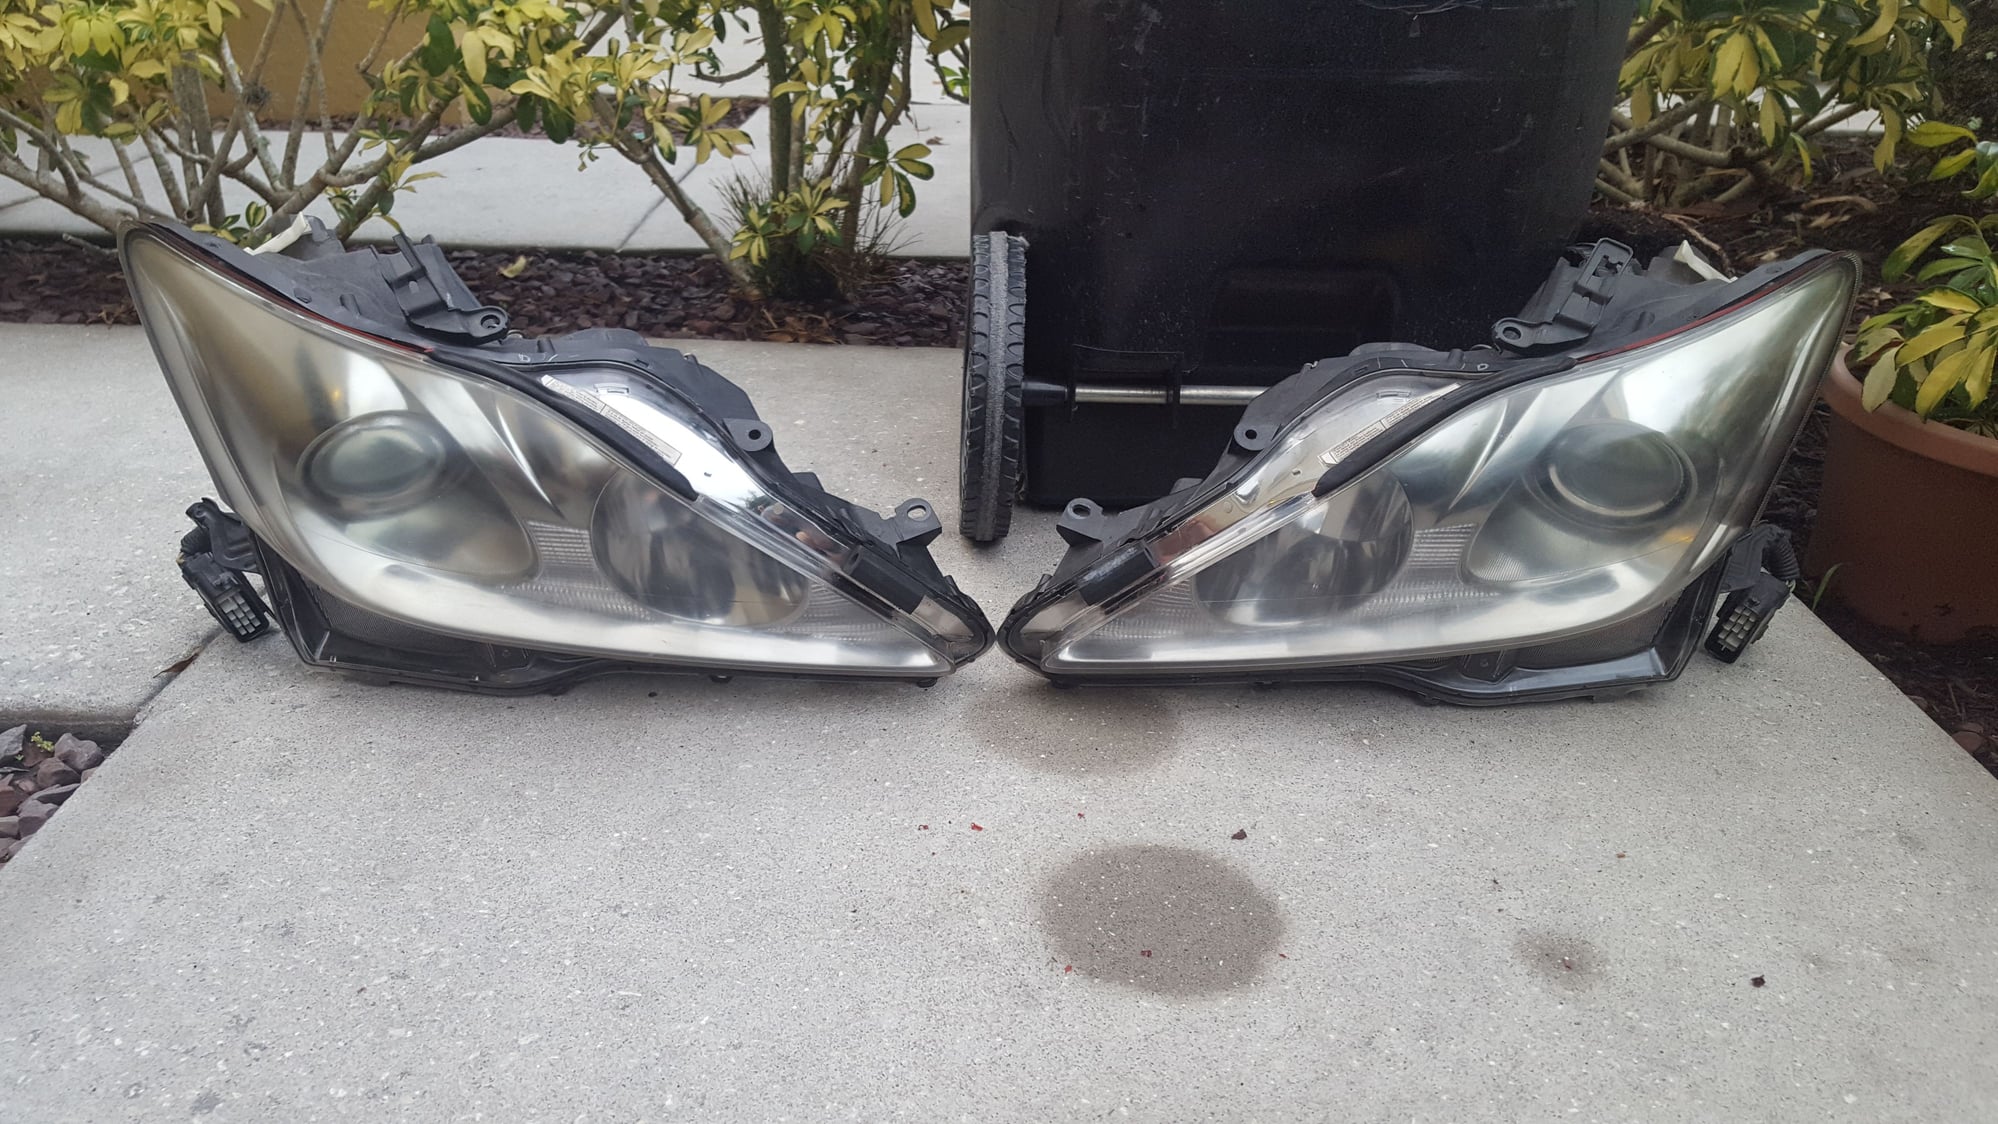 Exterior Body Parts - FS: ISx50 parts - 2IS Headlights, Taillights, OEM 18" Wheels, Air Intake - Used - 2006 to 2013 Lexus IS250 - 2006 to 2013 Lexus IS350 - Orlando, FL 32828, United States